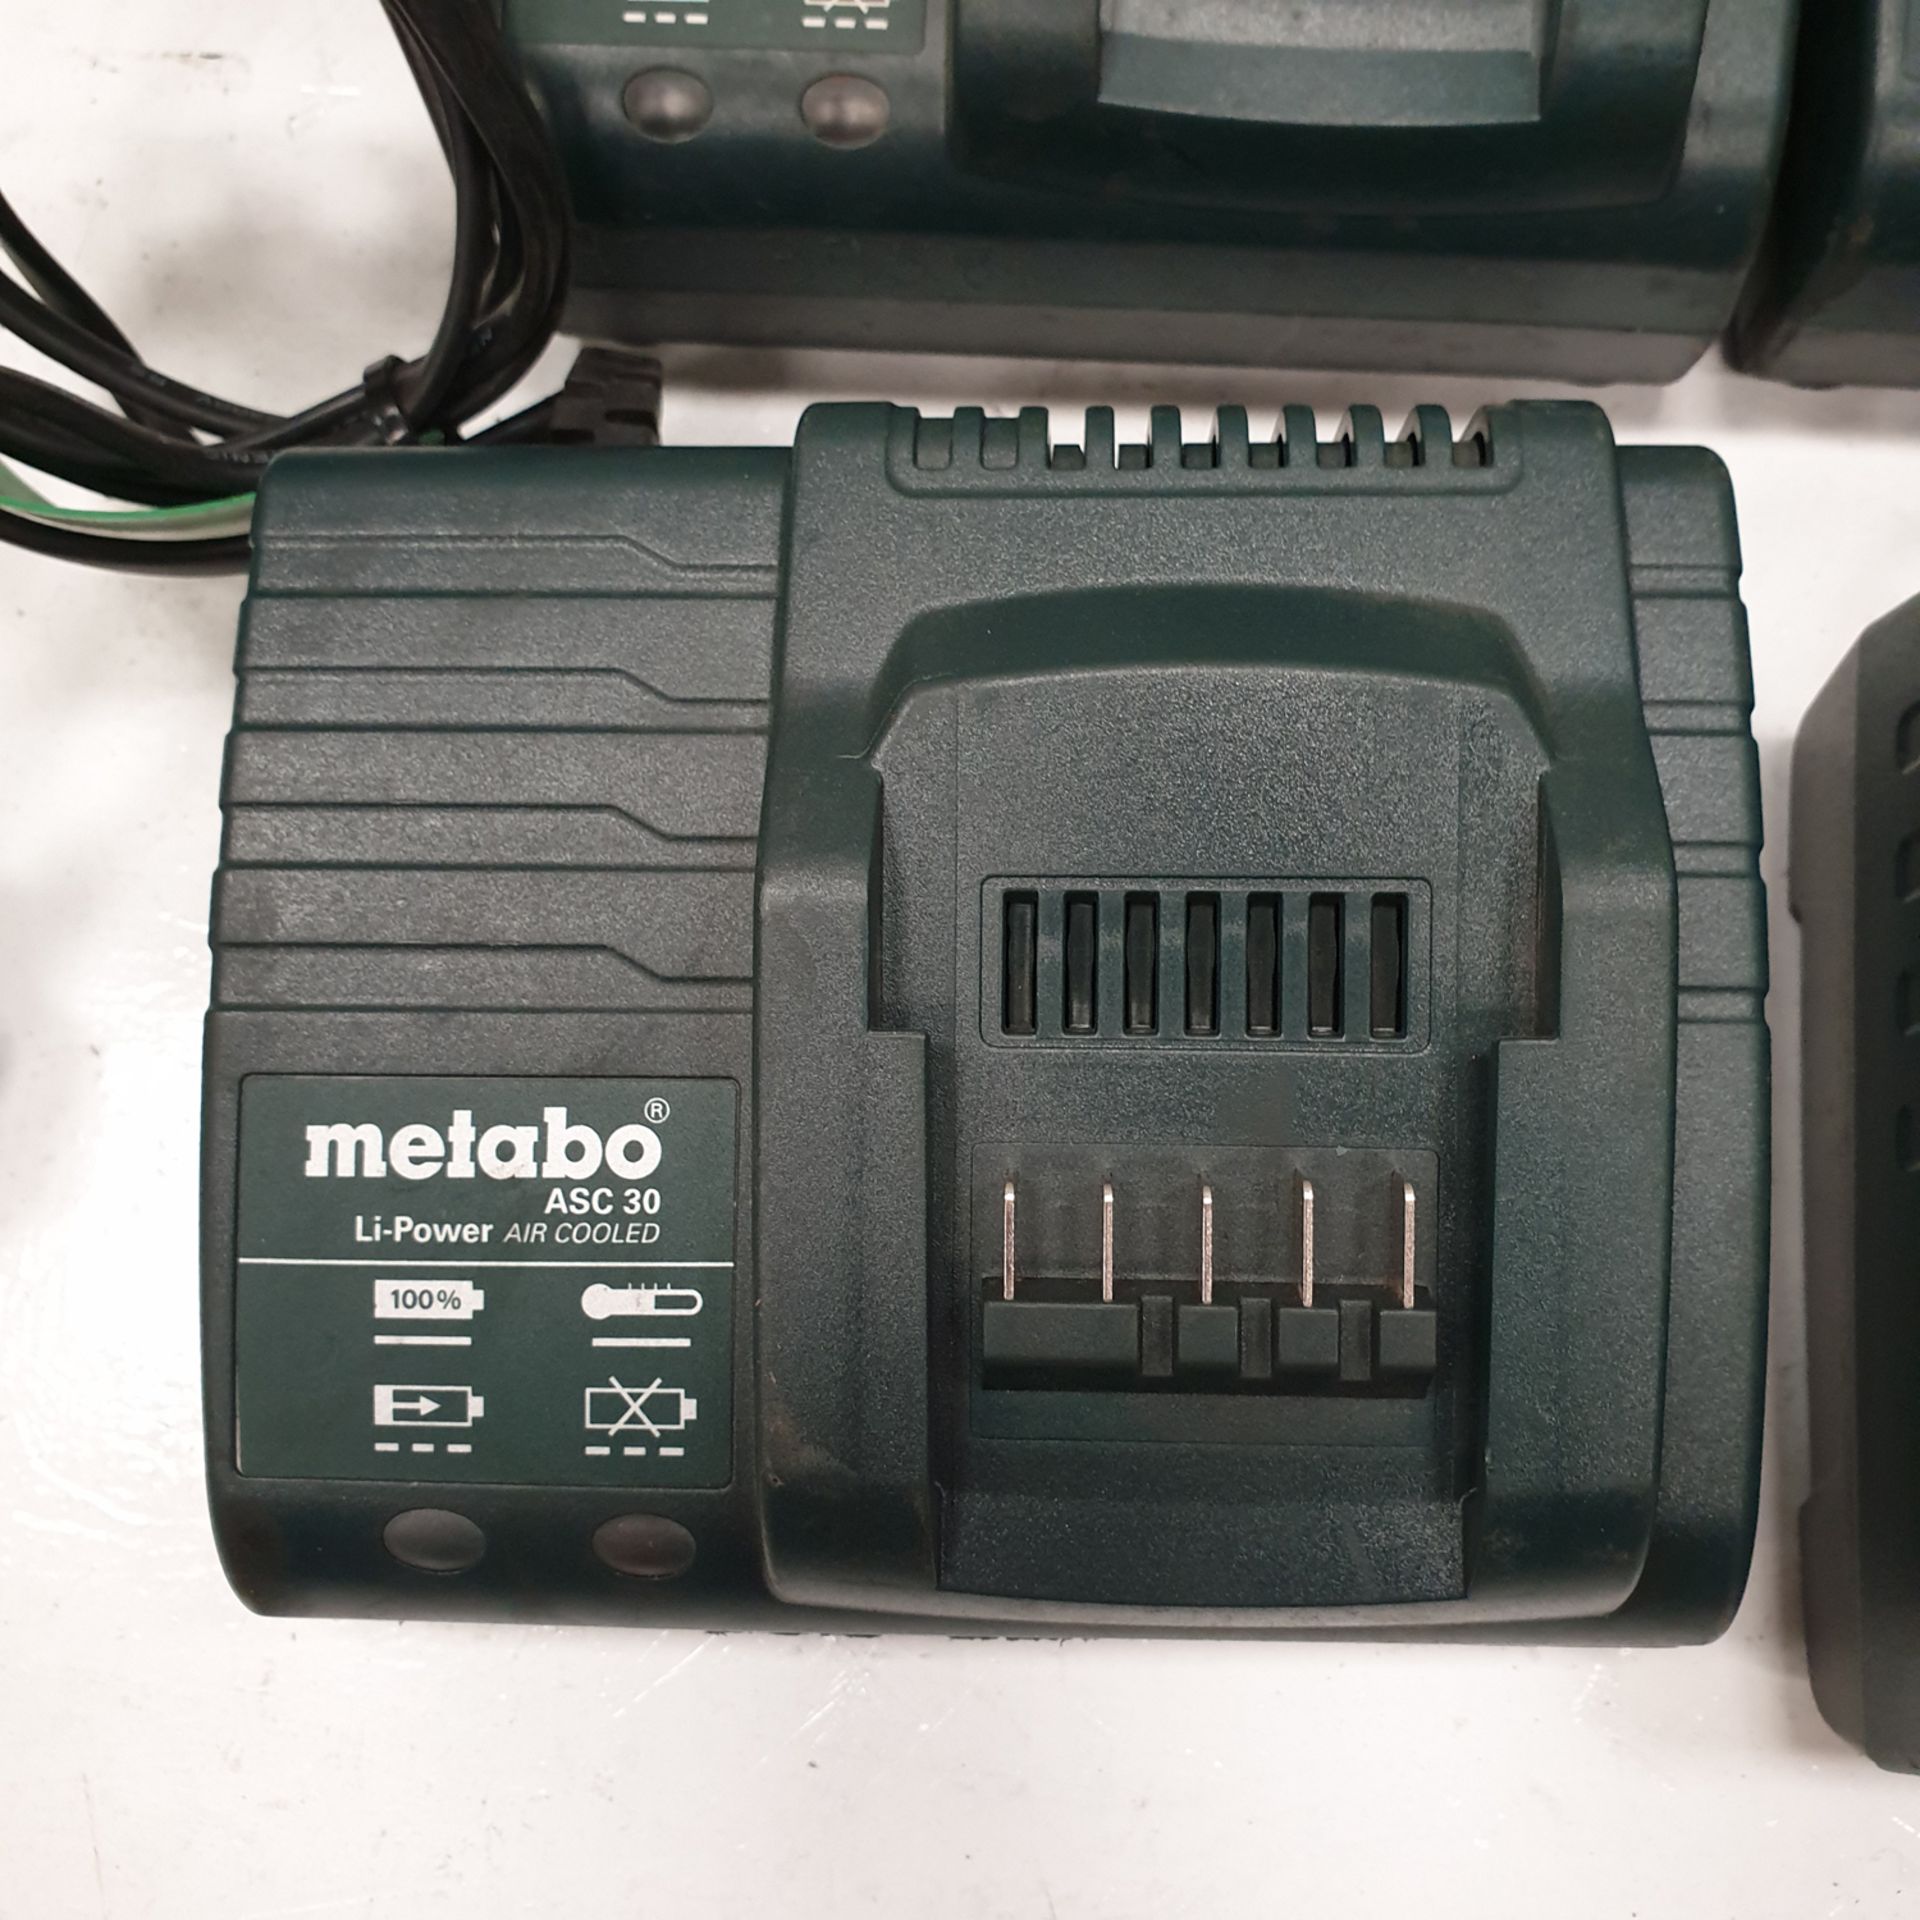 4 x Metabo ASC 30 Battery Chargers. 220-240 Volt. - Image 2 of 3